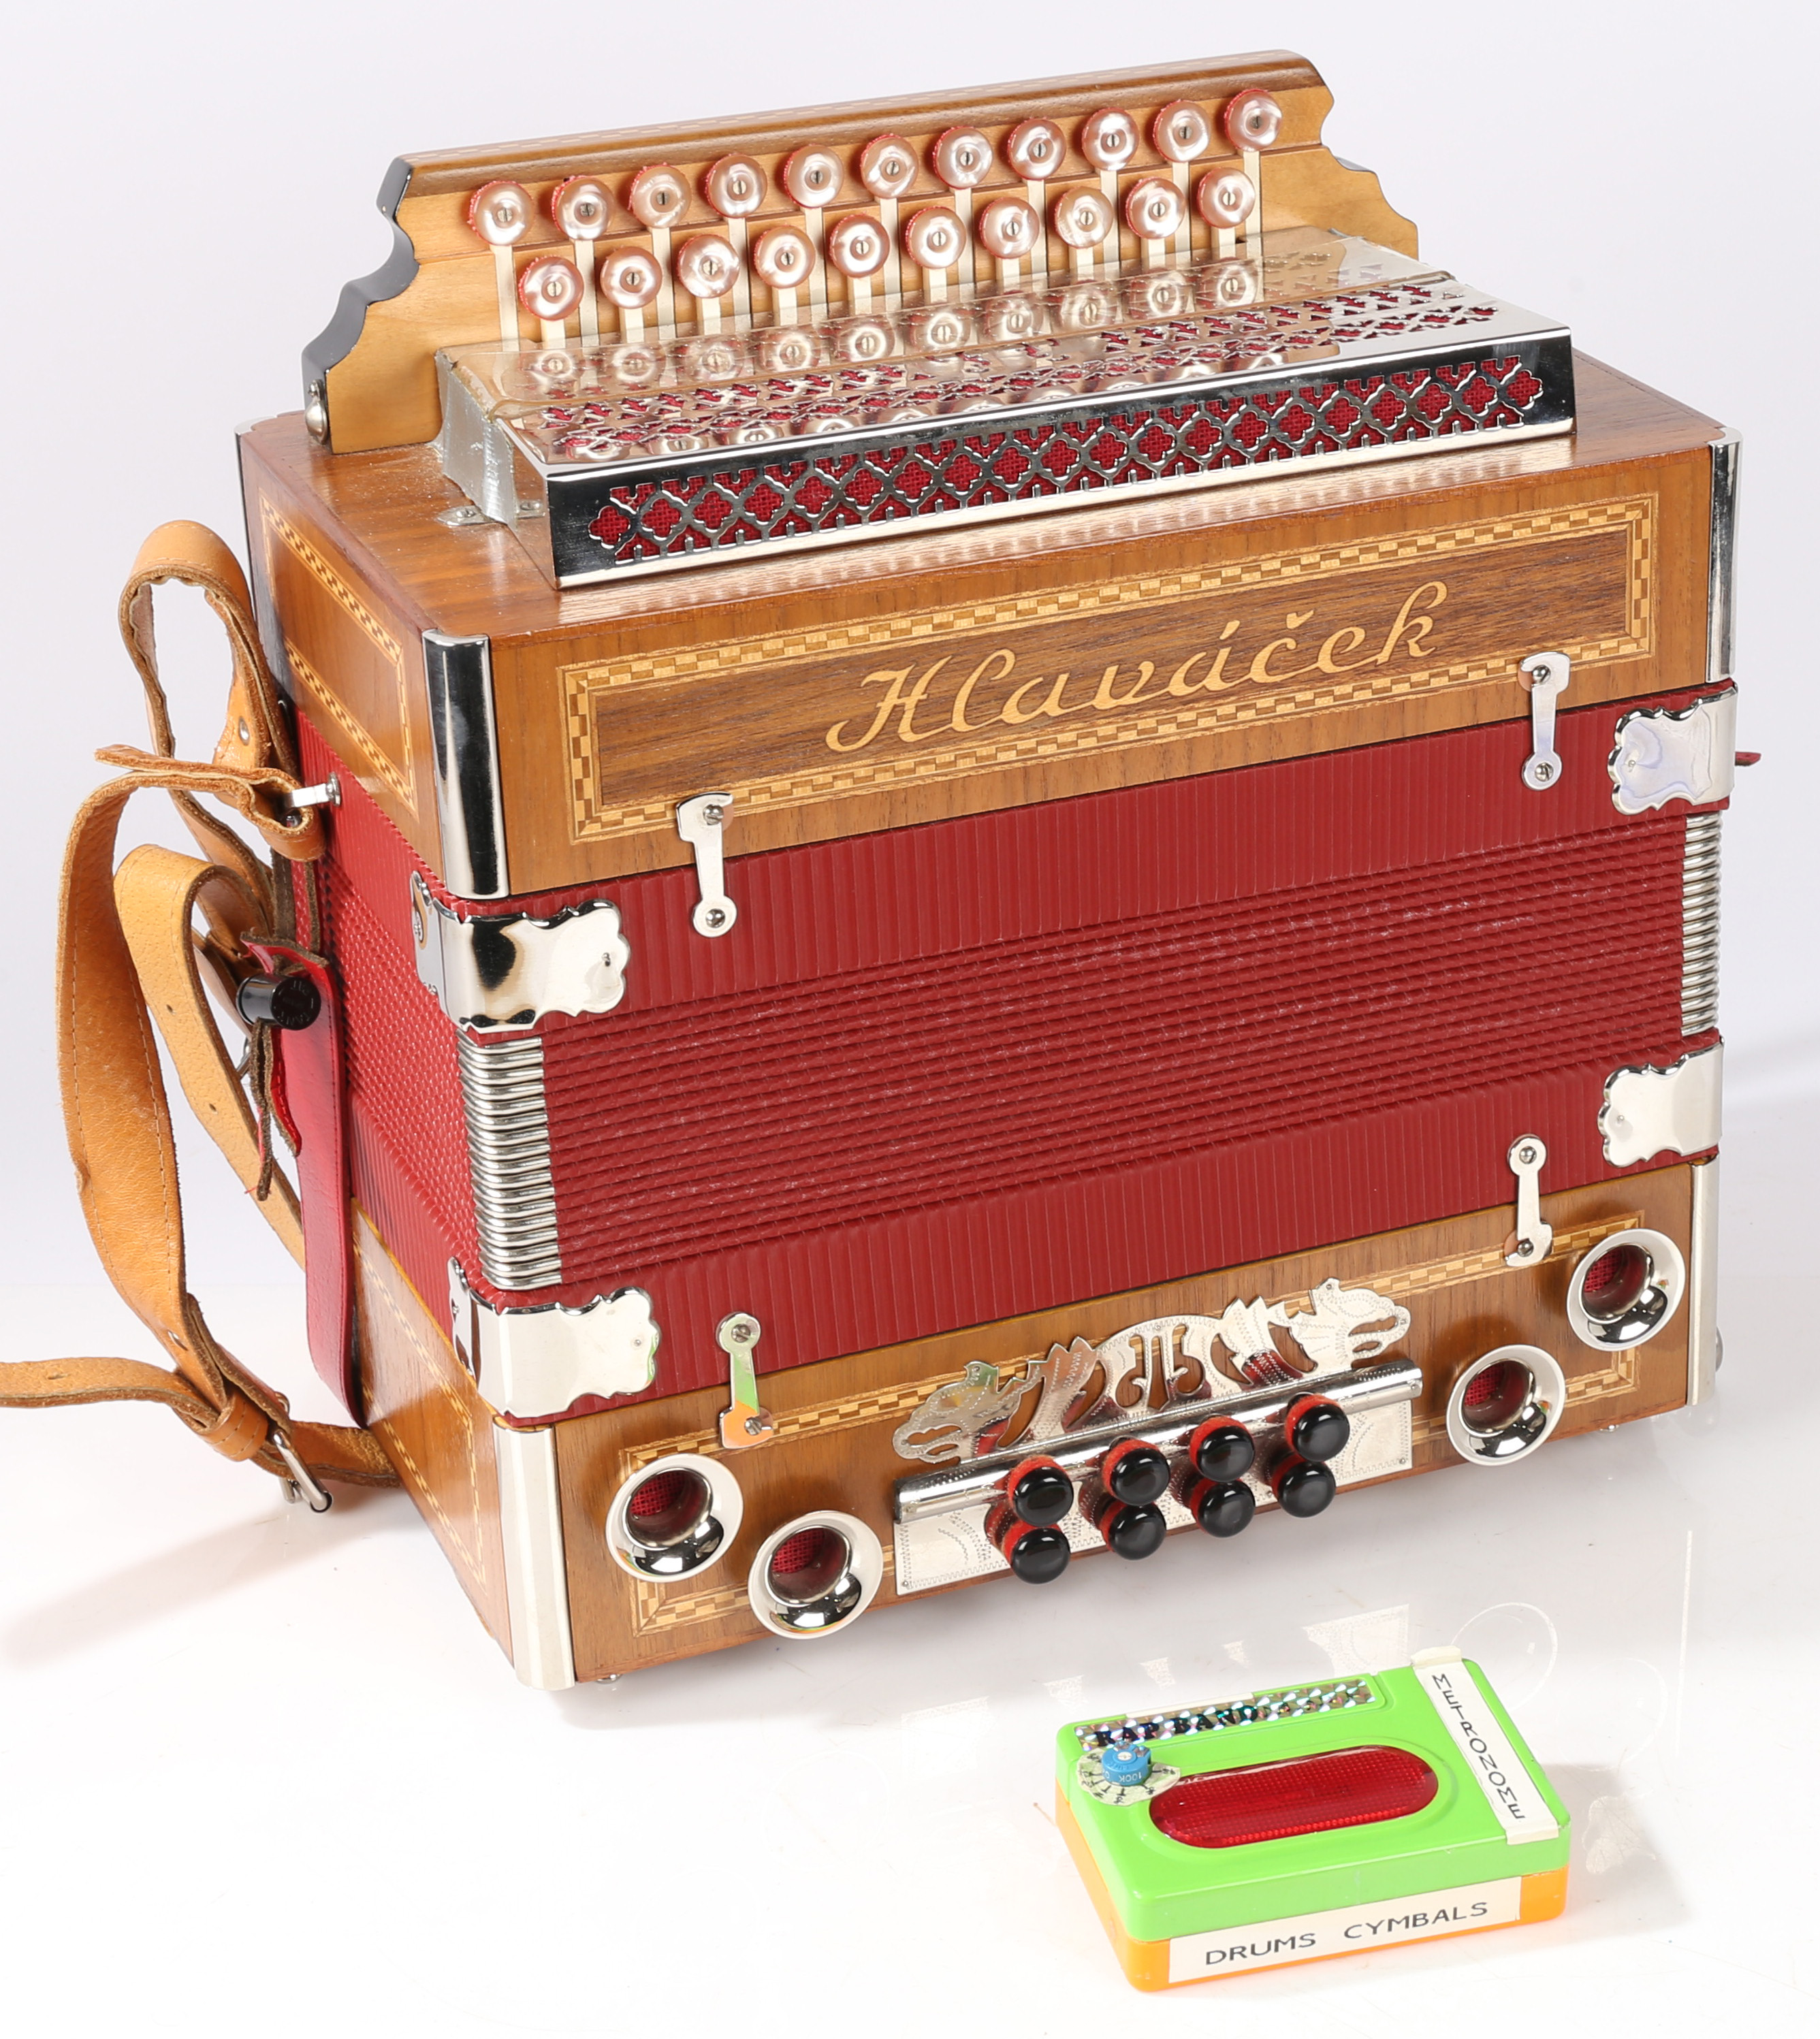 Hlavacek Accordion with soft case, accessories/ tools, and straps. Made in Czech Republic.